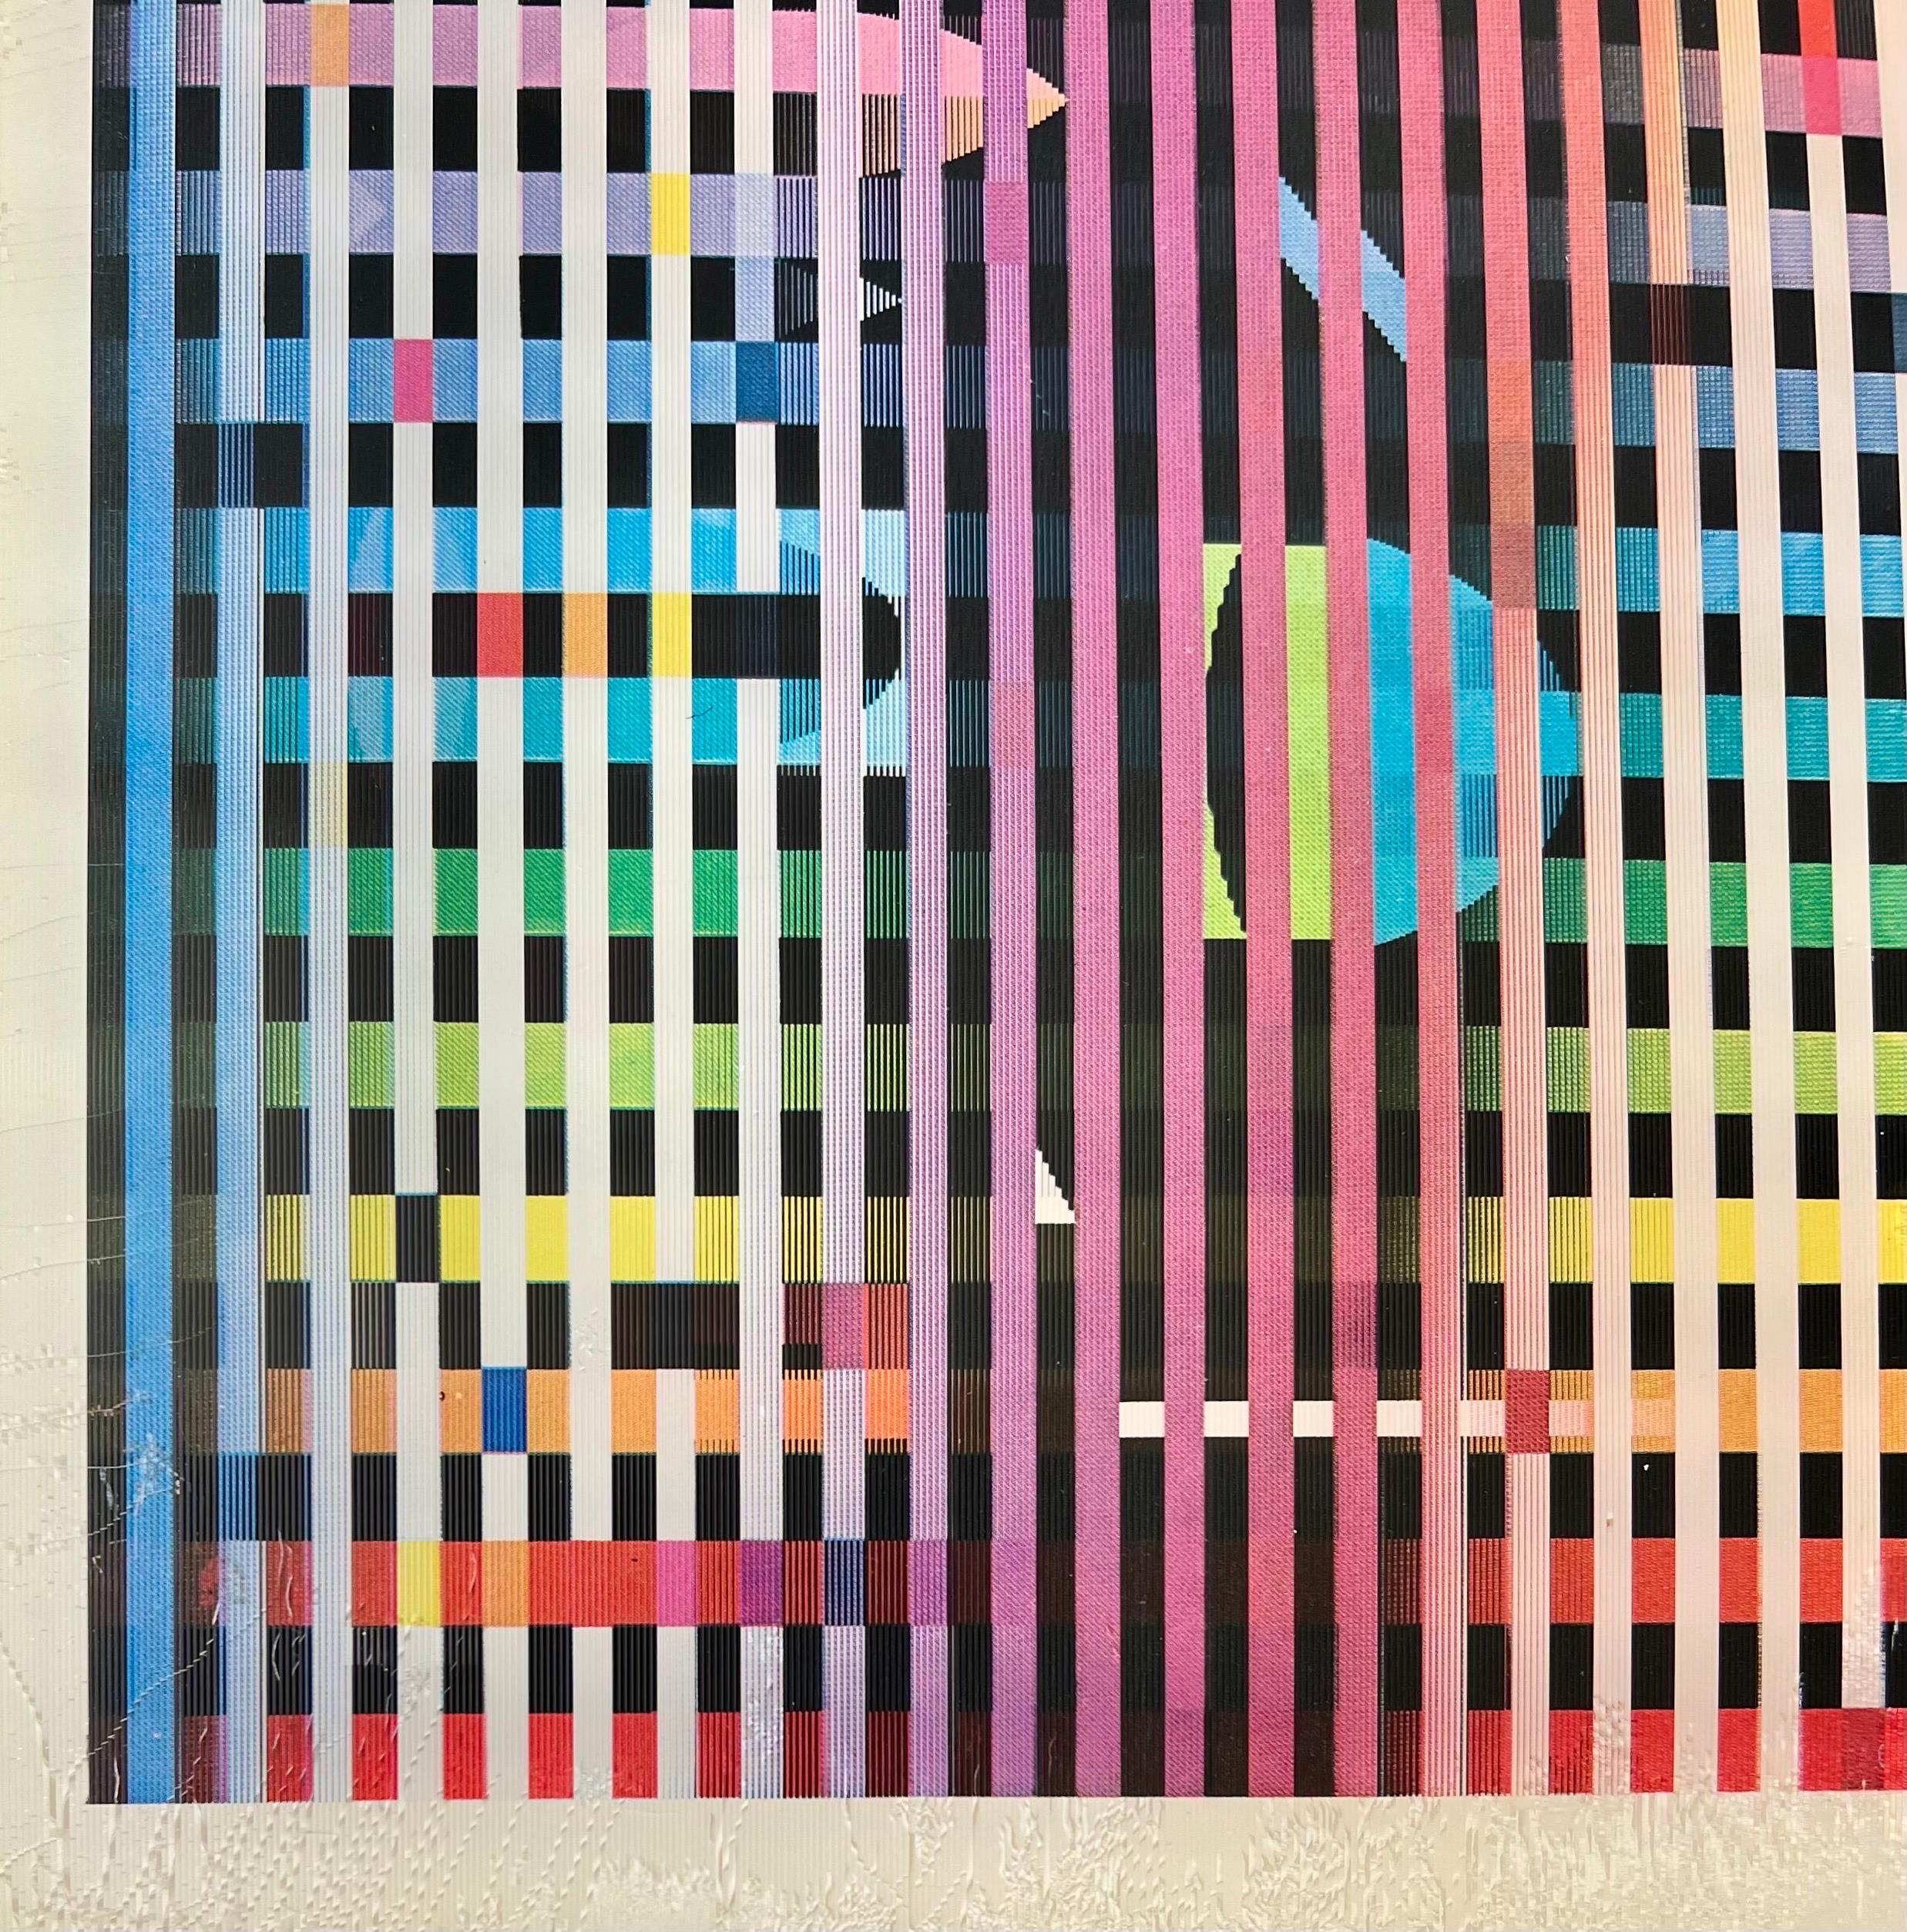 Yaacov Agam, Israeli (b. 1928)
Hand signed, and numbered.
Limited edition lenticular lens kinetic Agamograph 
Titled 'Sea Fathom'. Hand-signed and numbered edition 24/99,  
size of work 11-3/4